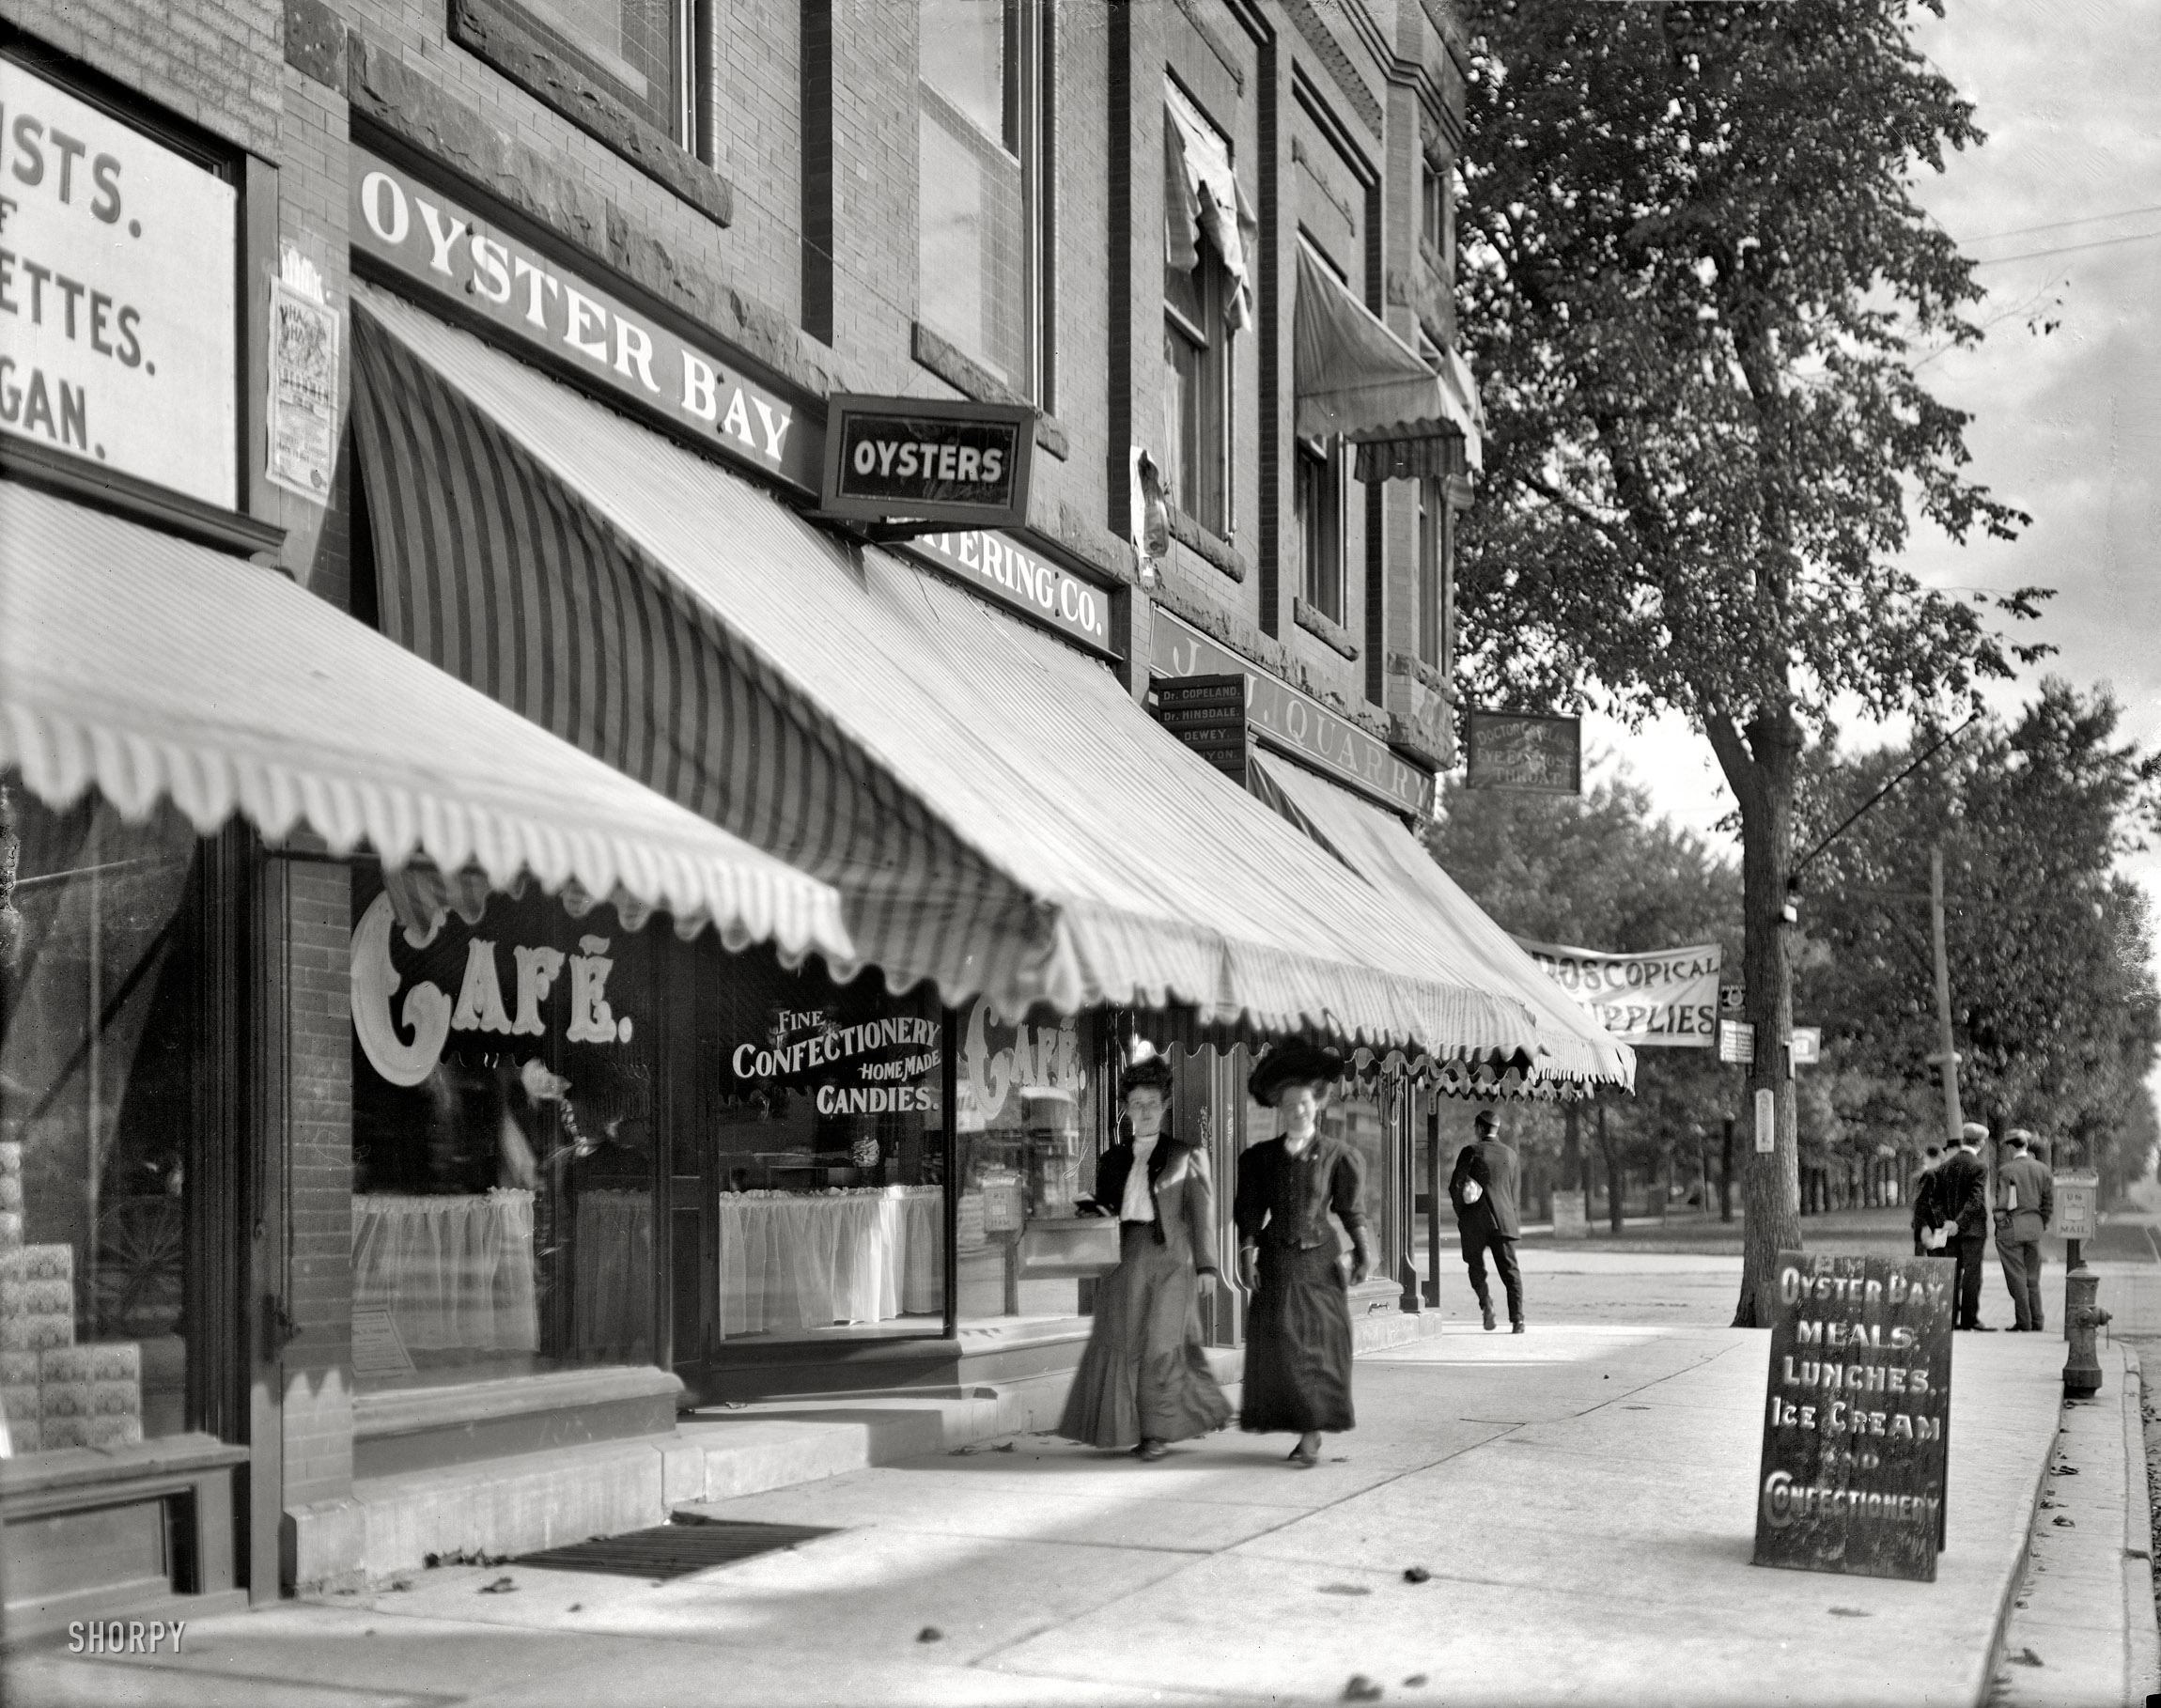 Ann Arbor, Michigan, circa 1905. "Oyster Bay Cafe." Continuing the bivalve theme. 8x10 inch glass negative, Detroit Publishing Company. View full size.